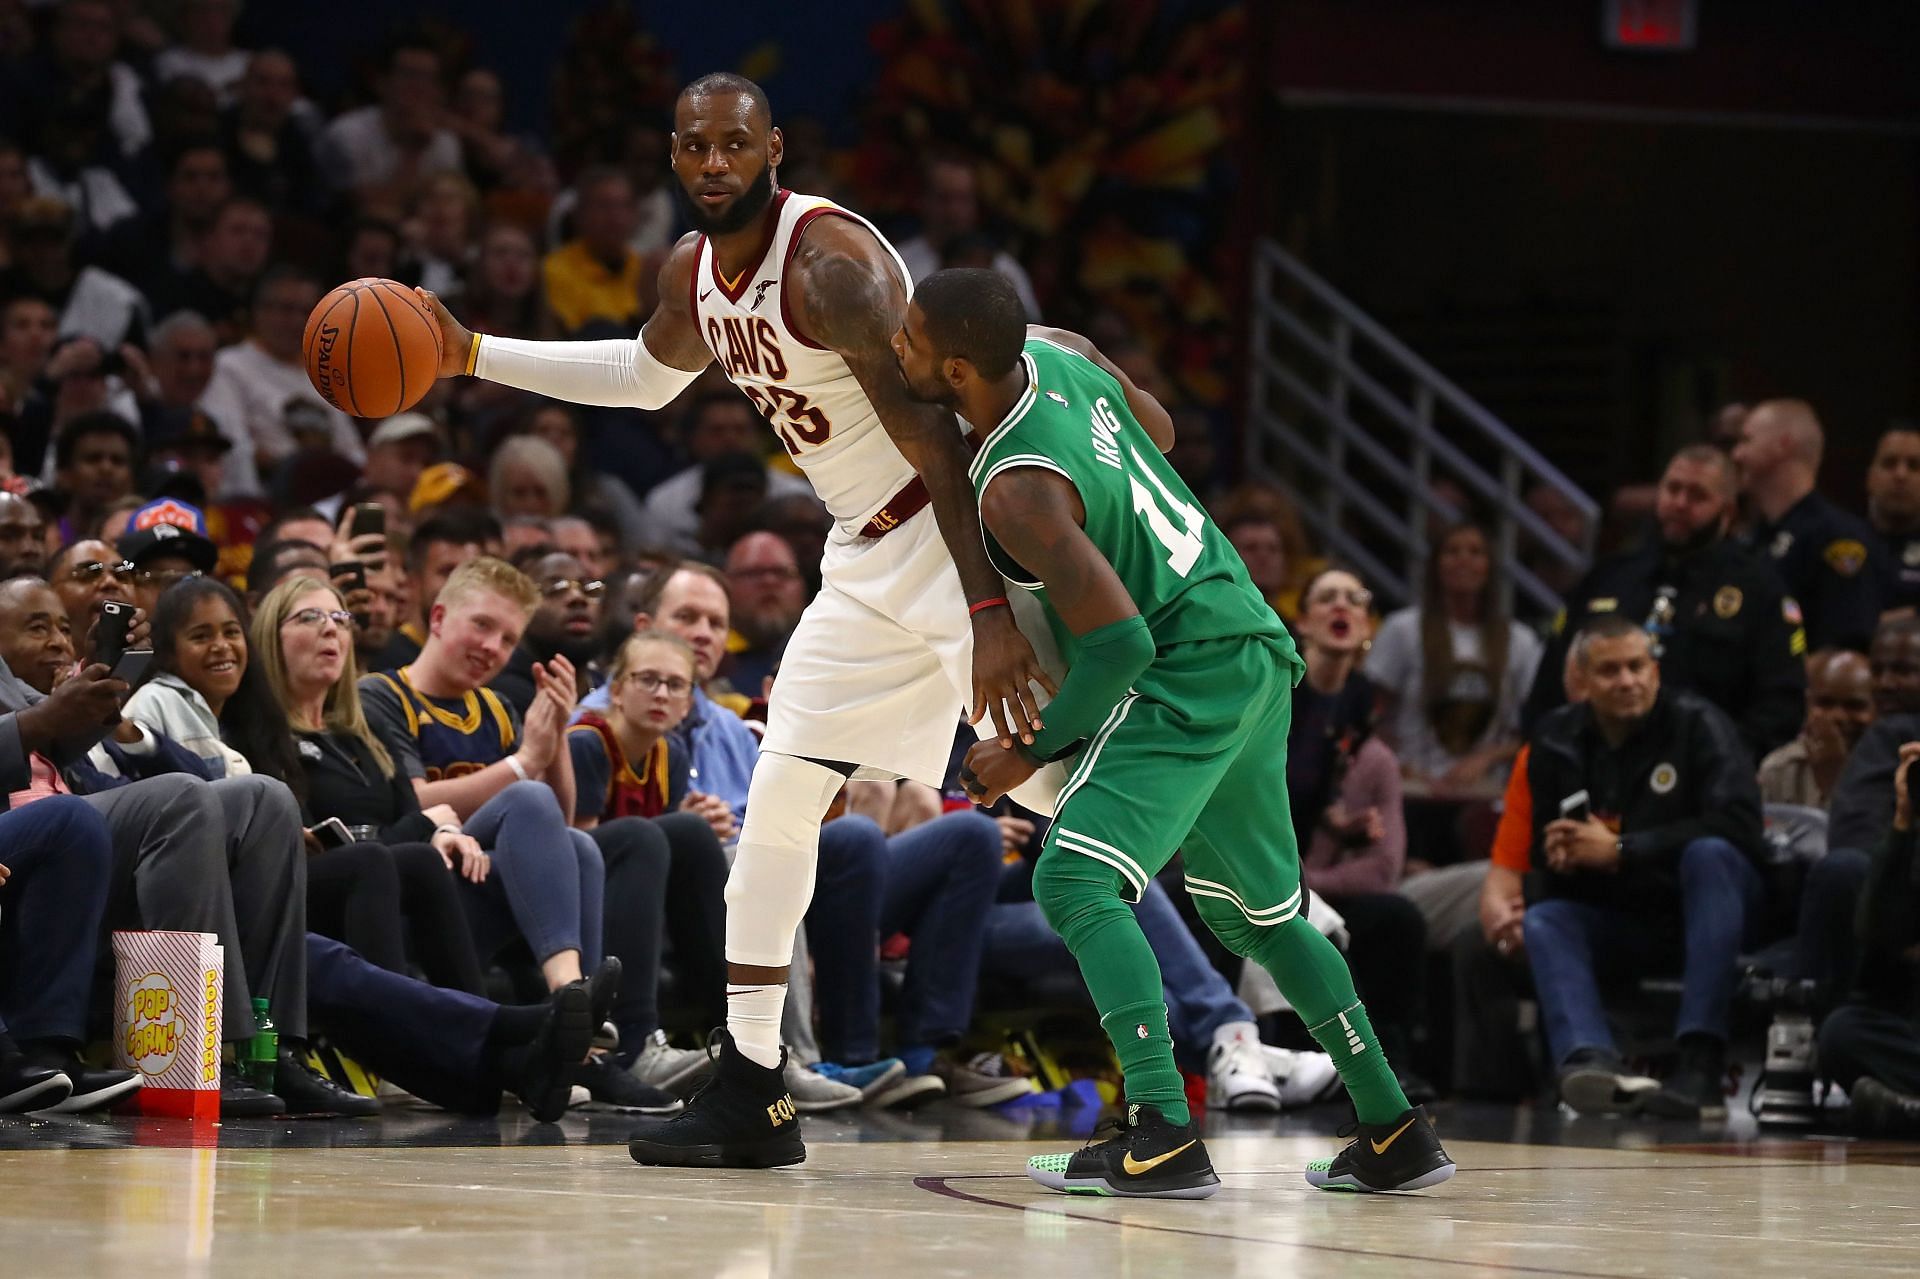 LeBron James being guarded by Kyrie Irving